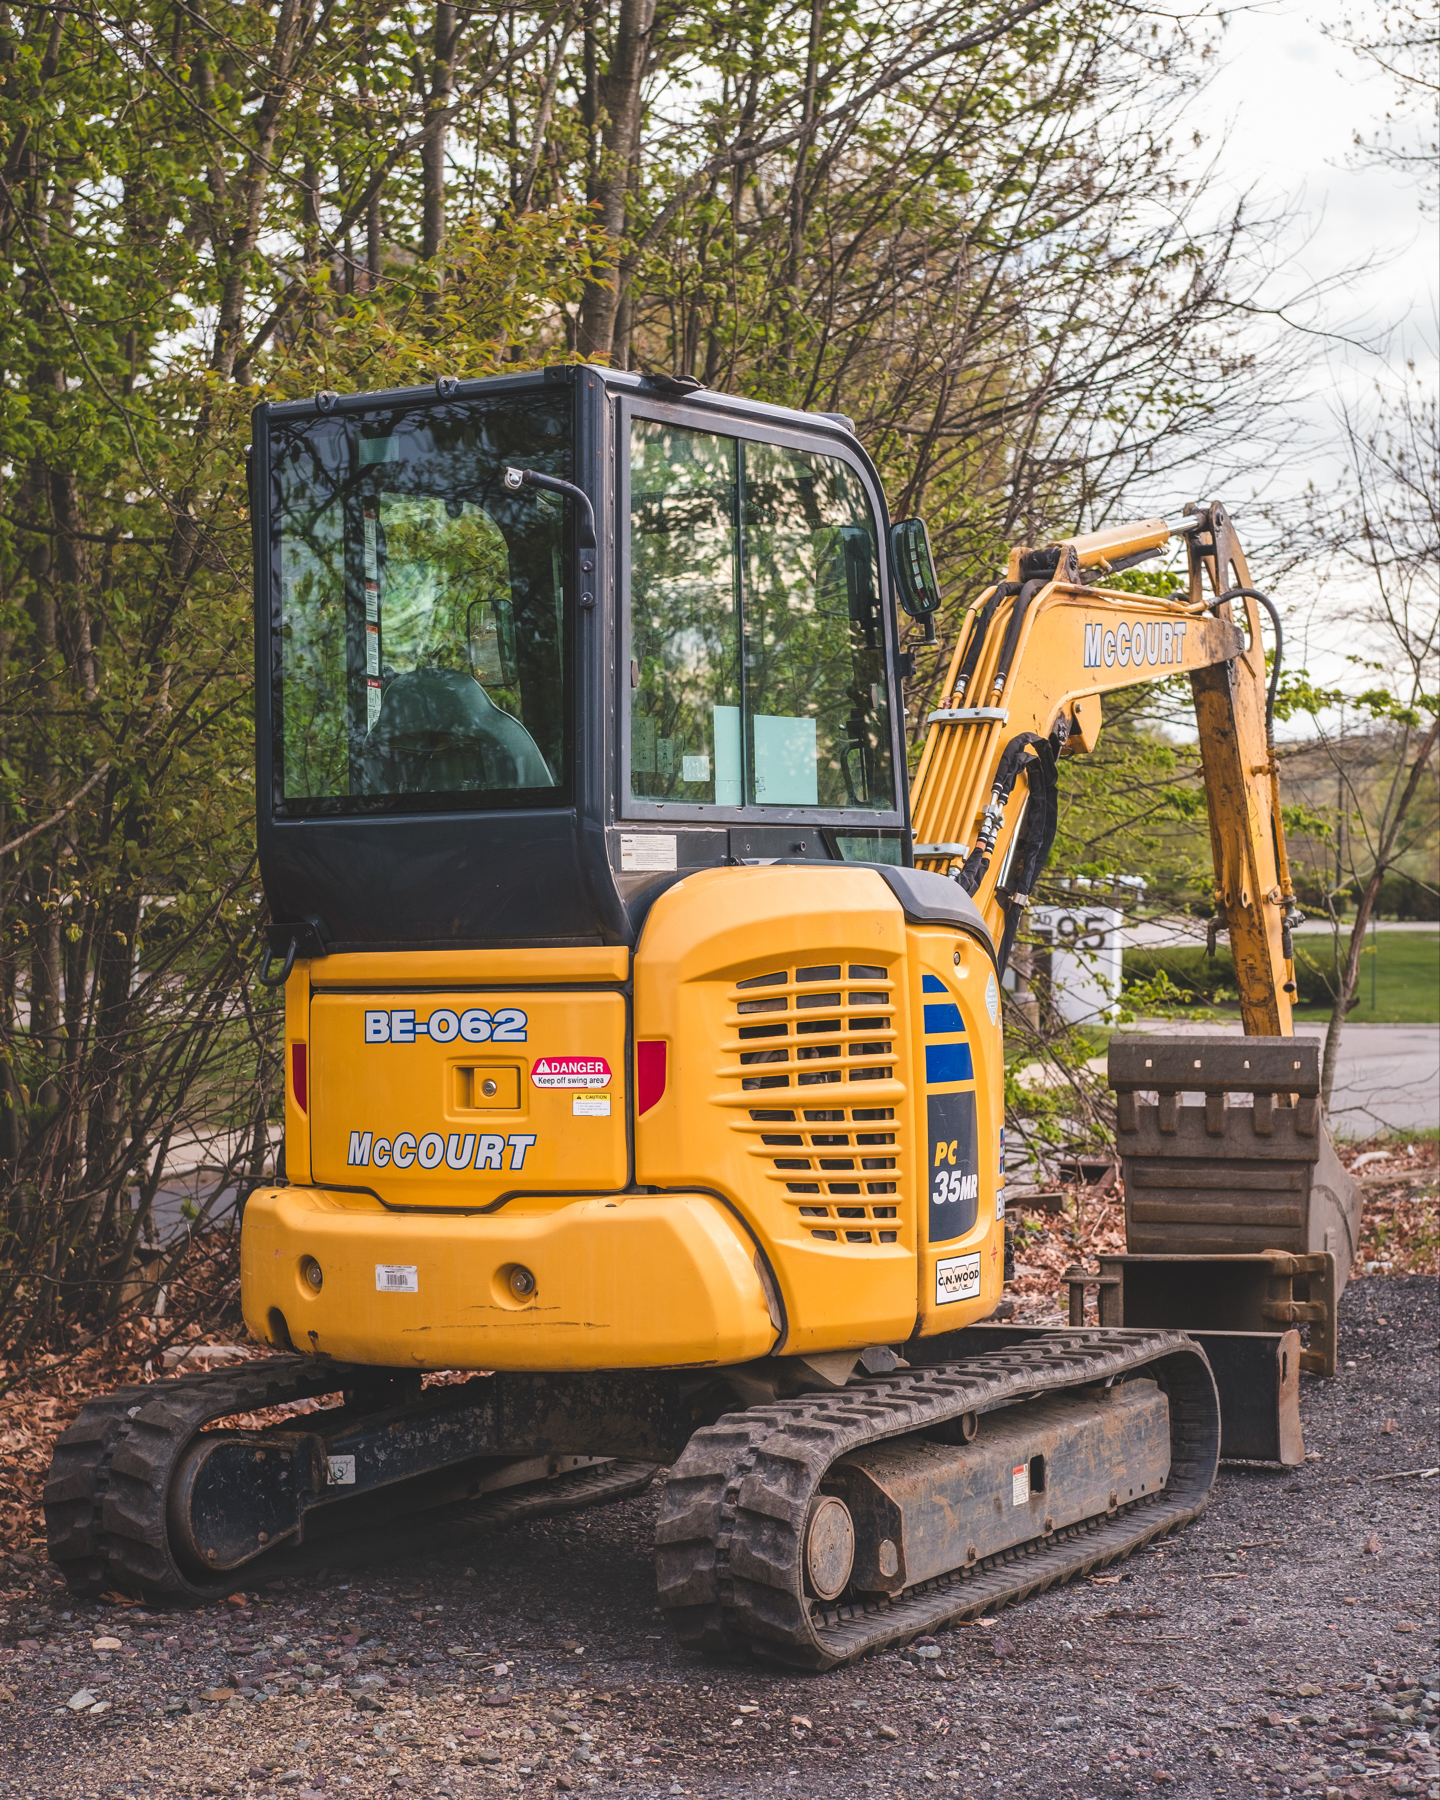 An empty yellow compact excavator with “McCourt” written on the arm, parked on a gravel surface with trees in the background.